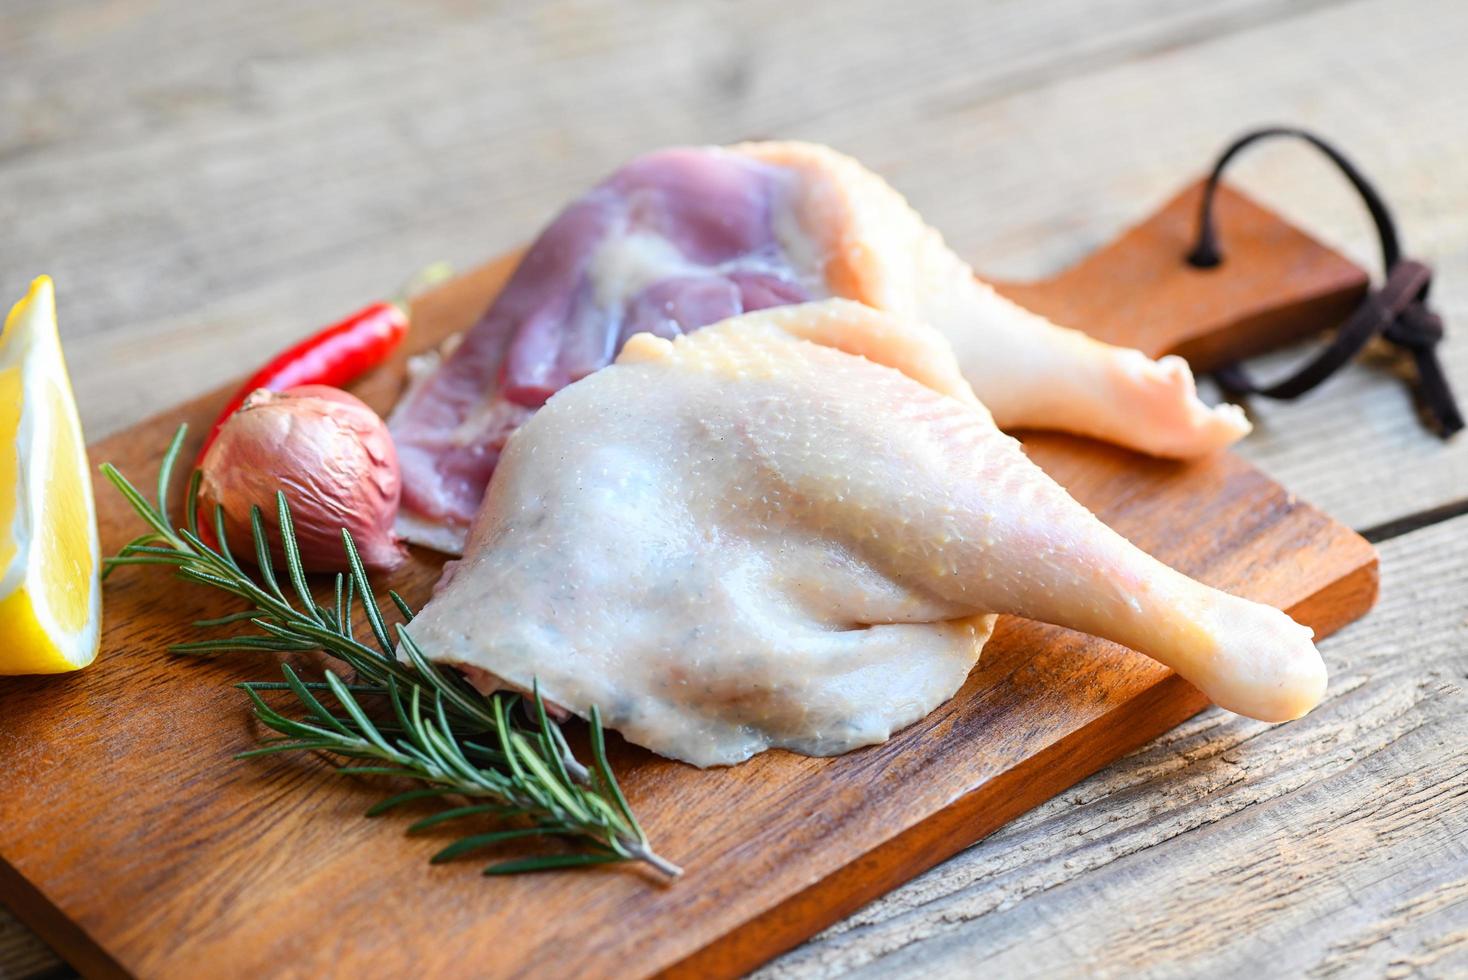 Raw duck legs with herb spices ready to cook on wooden cutting board, Fresh duck meat for food photo